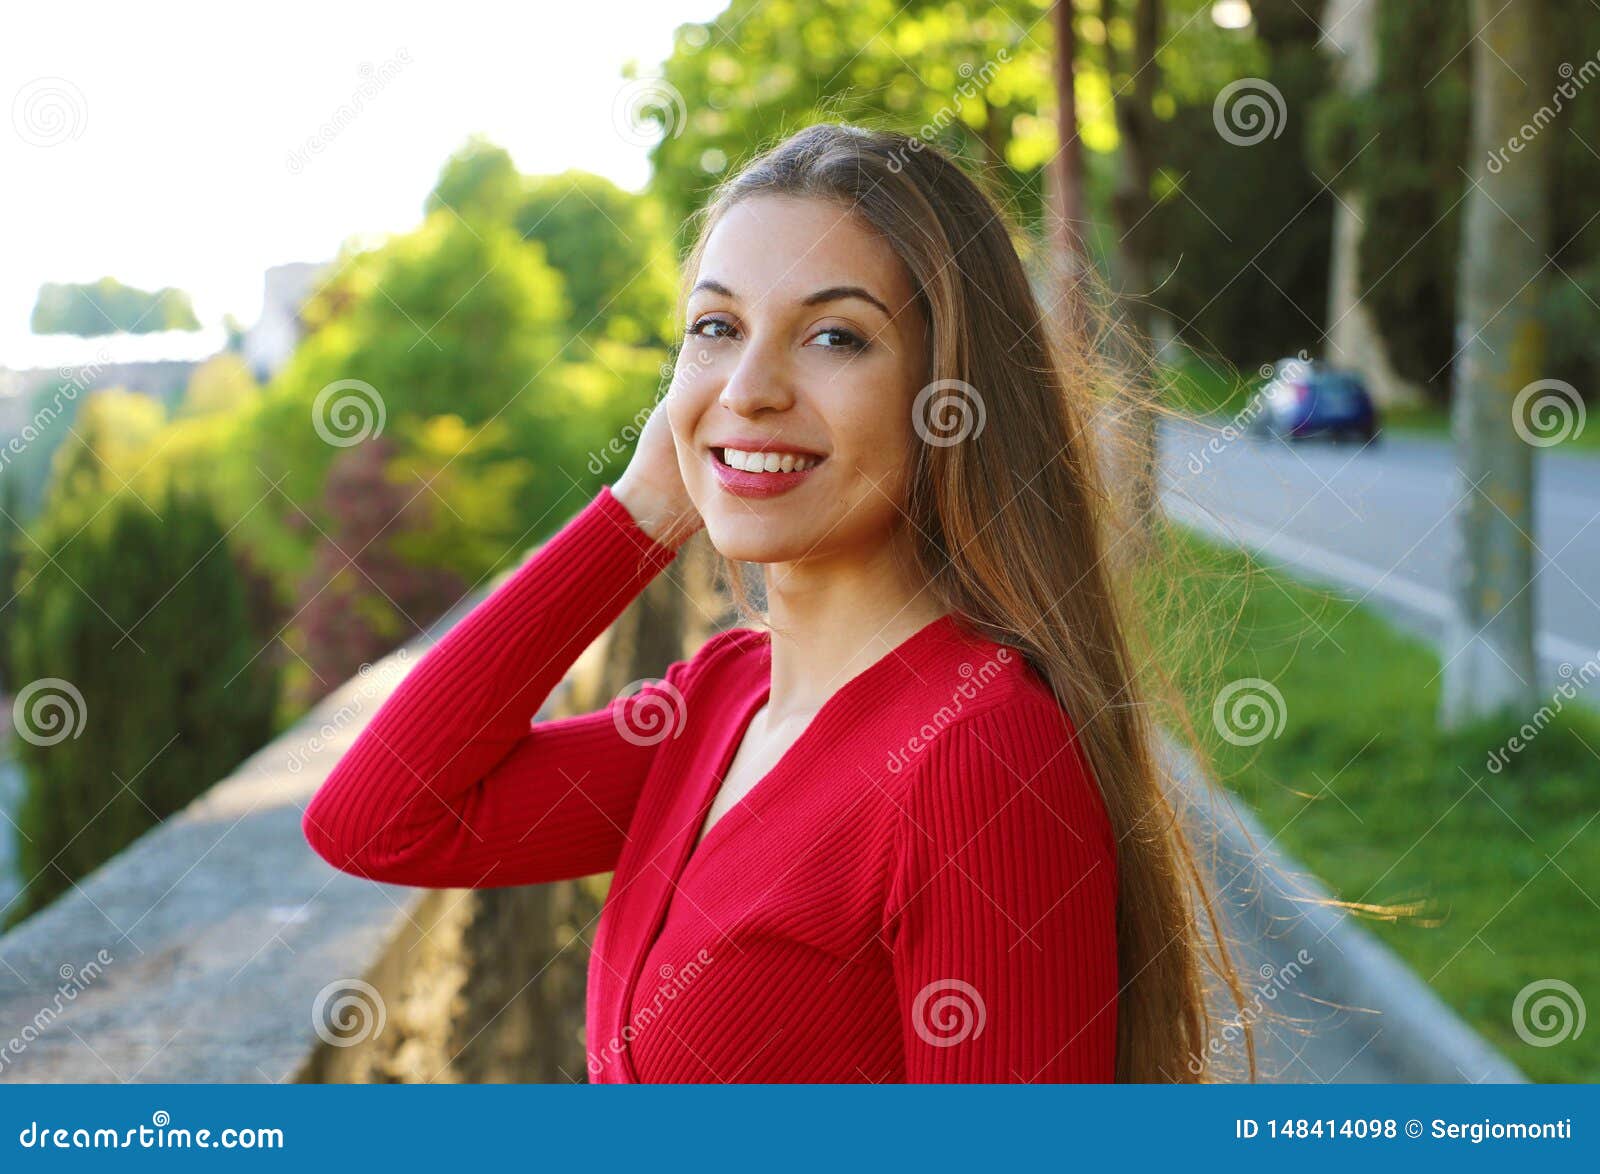 Gorgeous Young Woman With Long Hair Turn The Head And Looking At Camera When Walking In The 